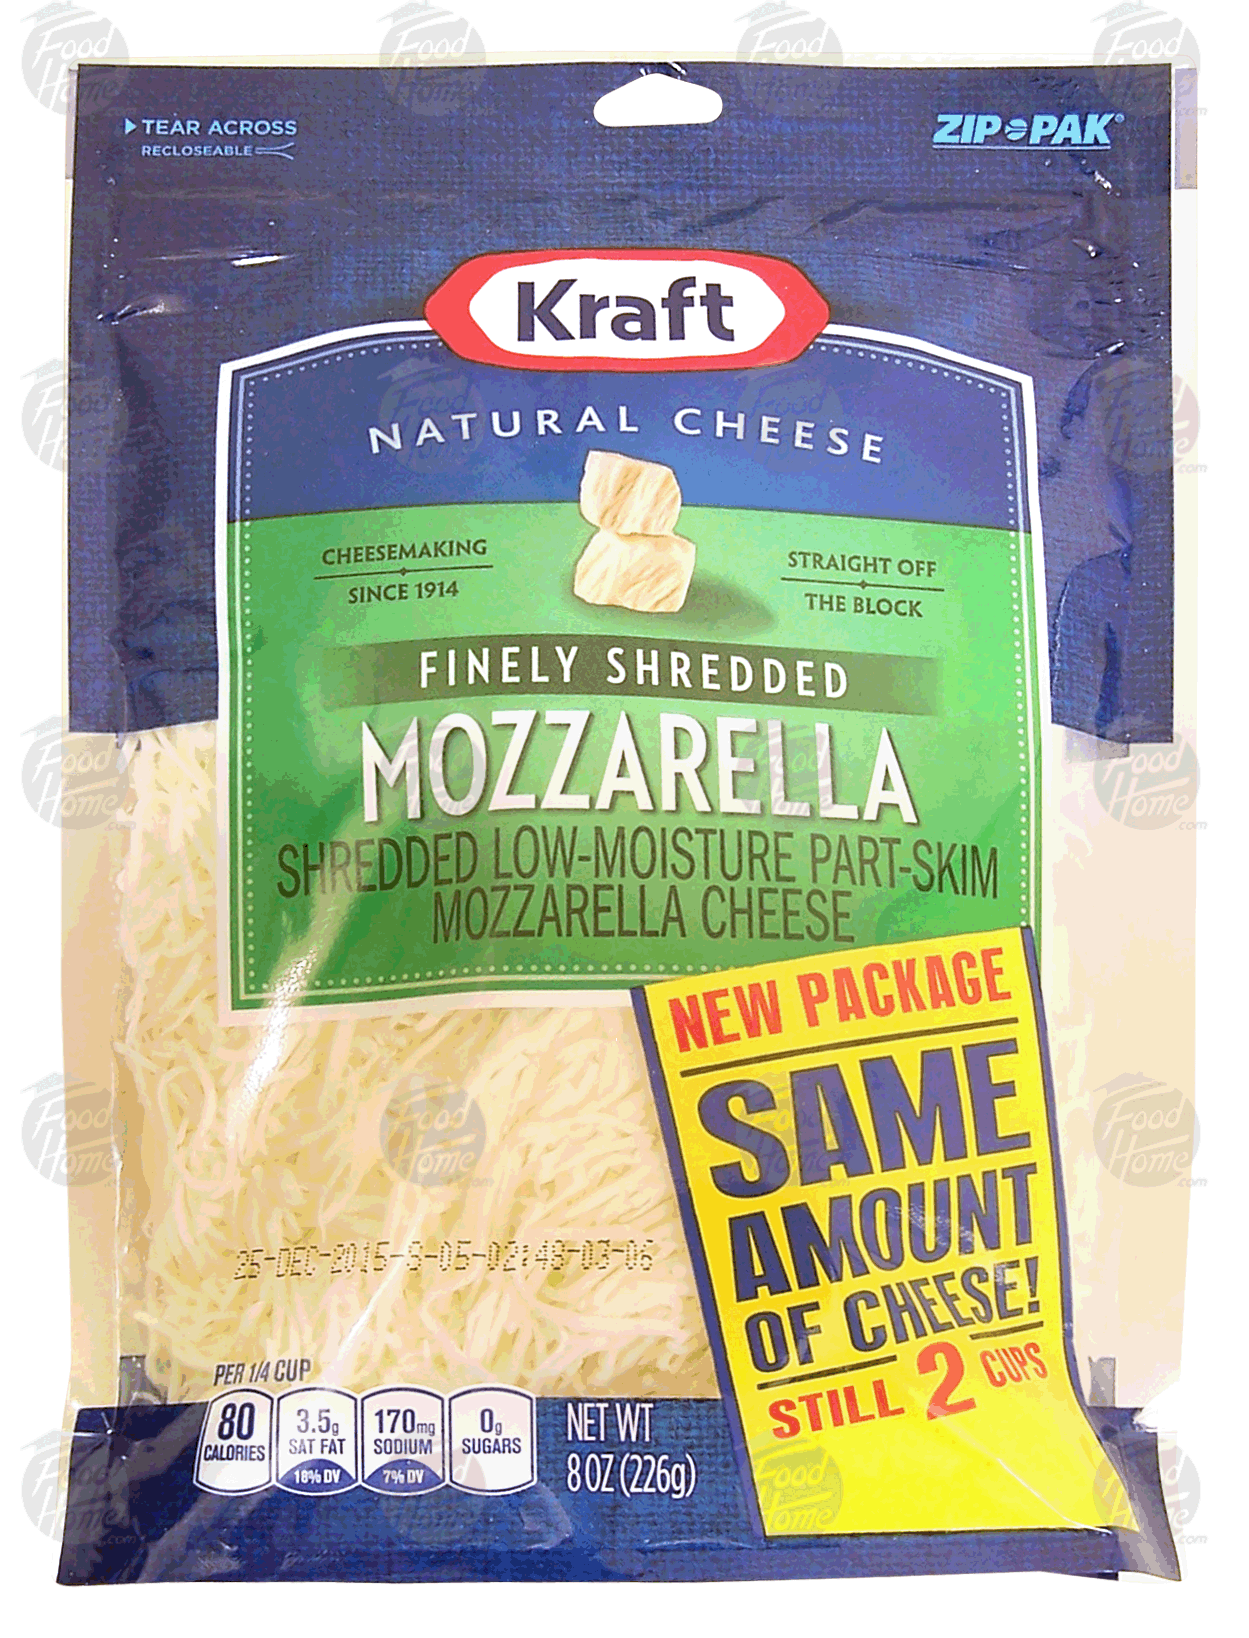 Kraft Natural Cheese finely shredded mozzarella cheese Full-Size Picture